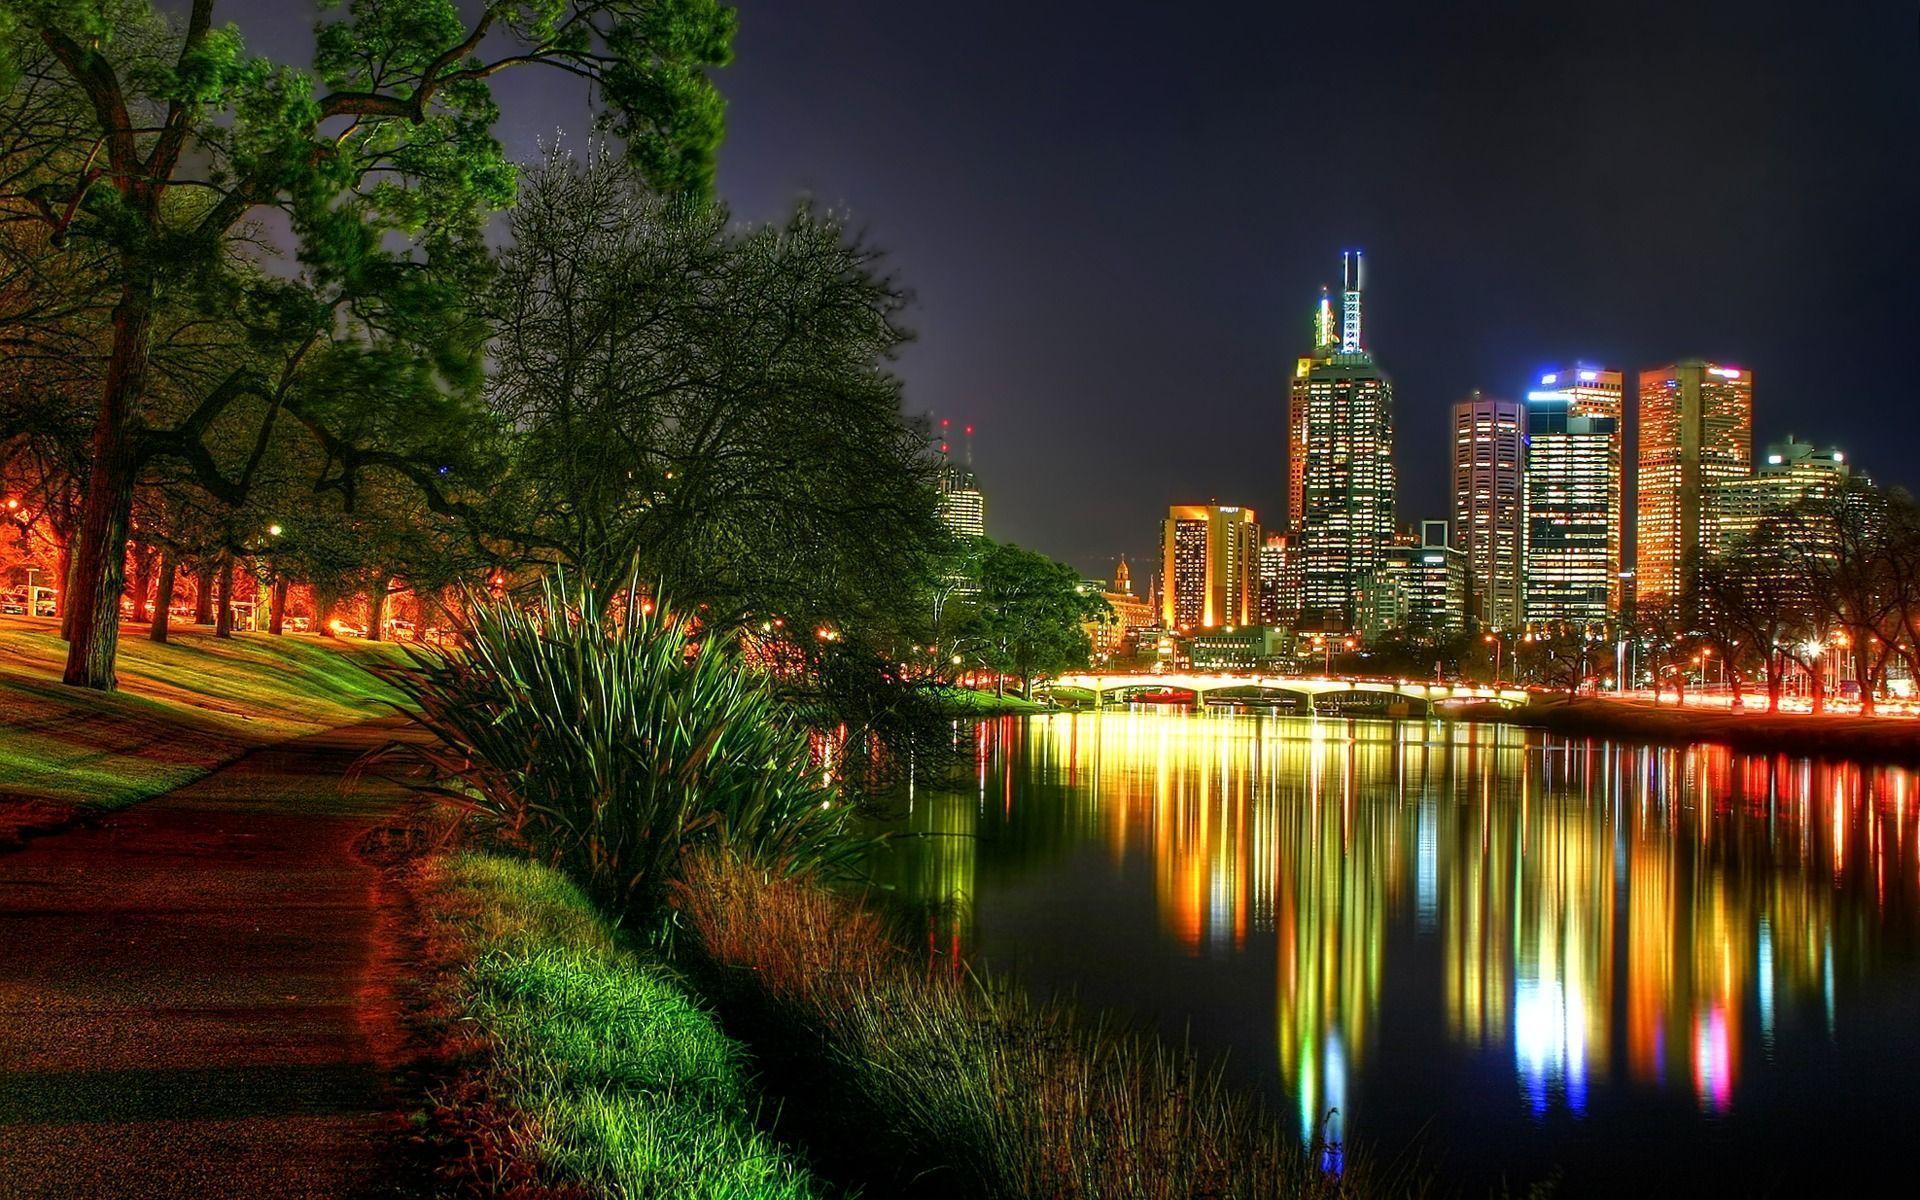 Staggering Melbourne HD Widescreen Wallpaper 1920x1200PX